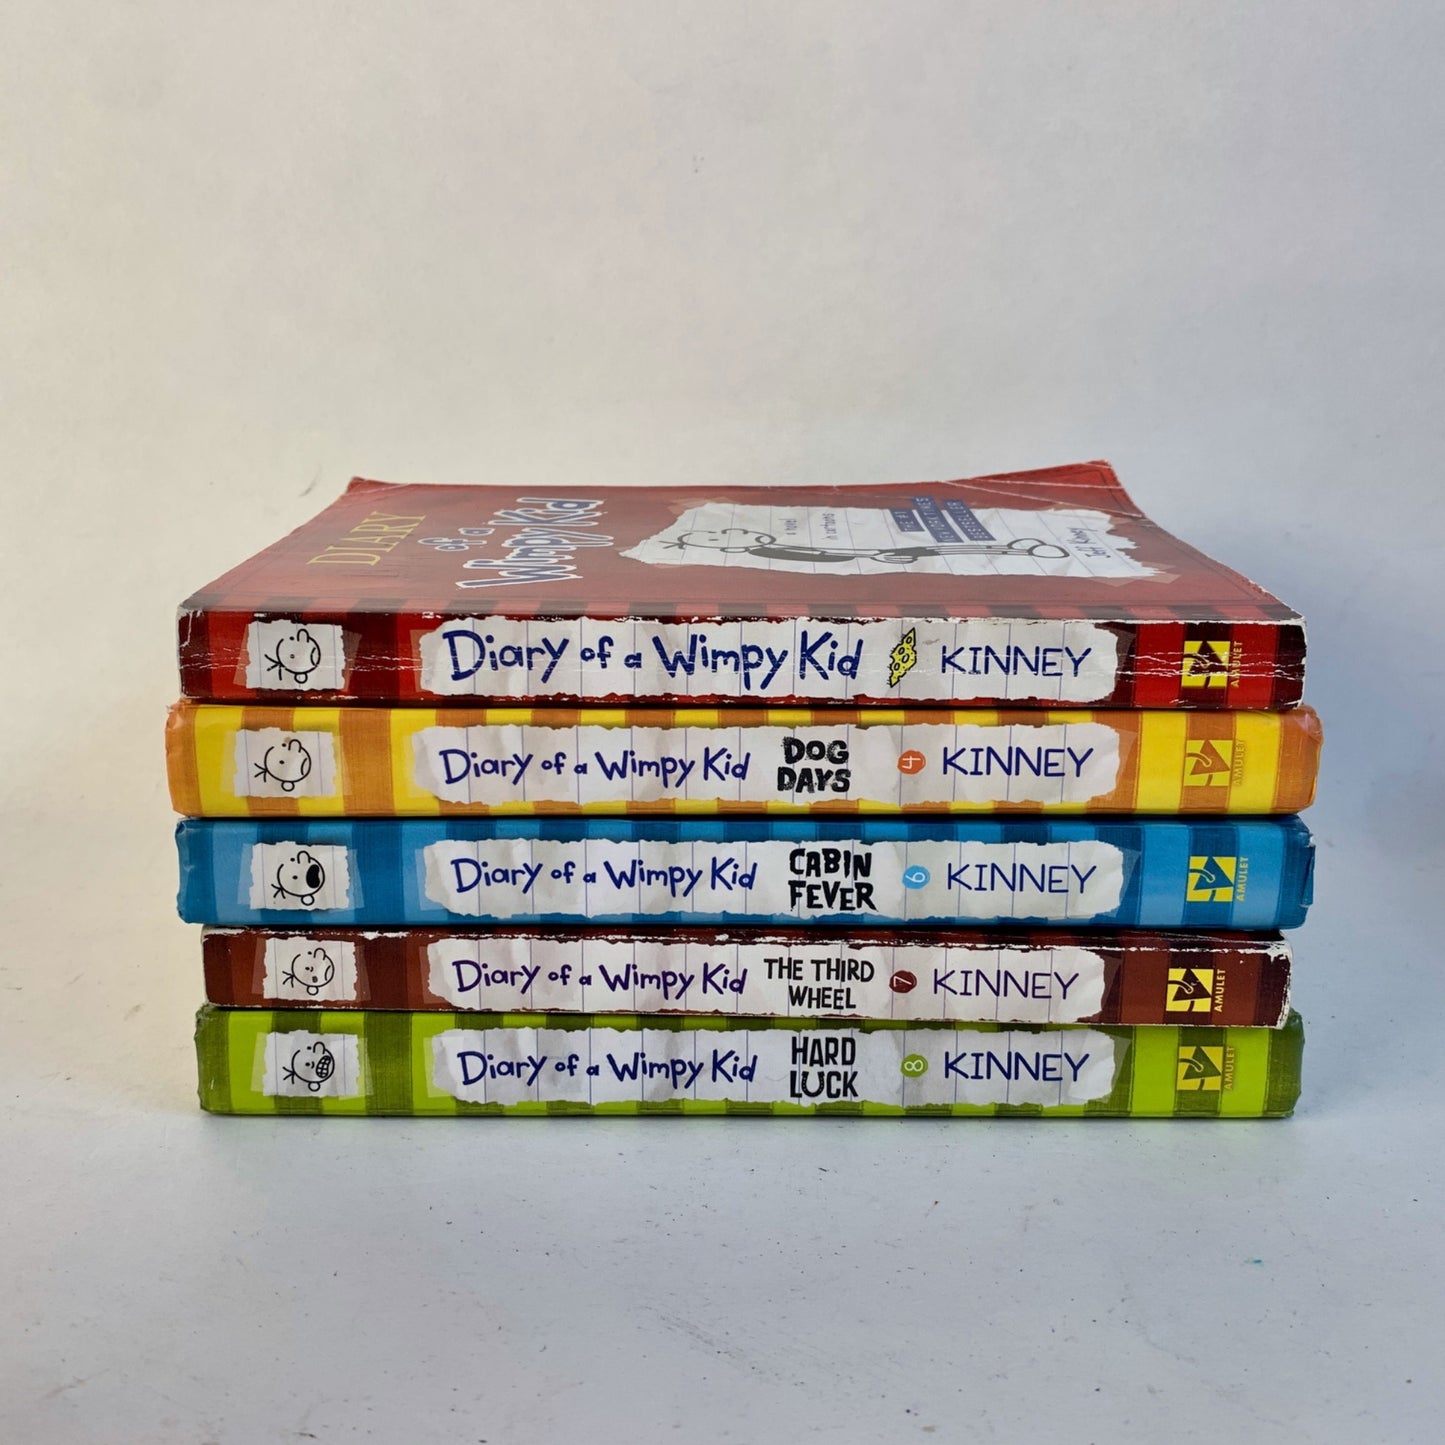 Diary of a Wimpy Kid Books Lot of 5 1 4 6 7 8